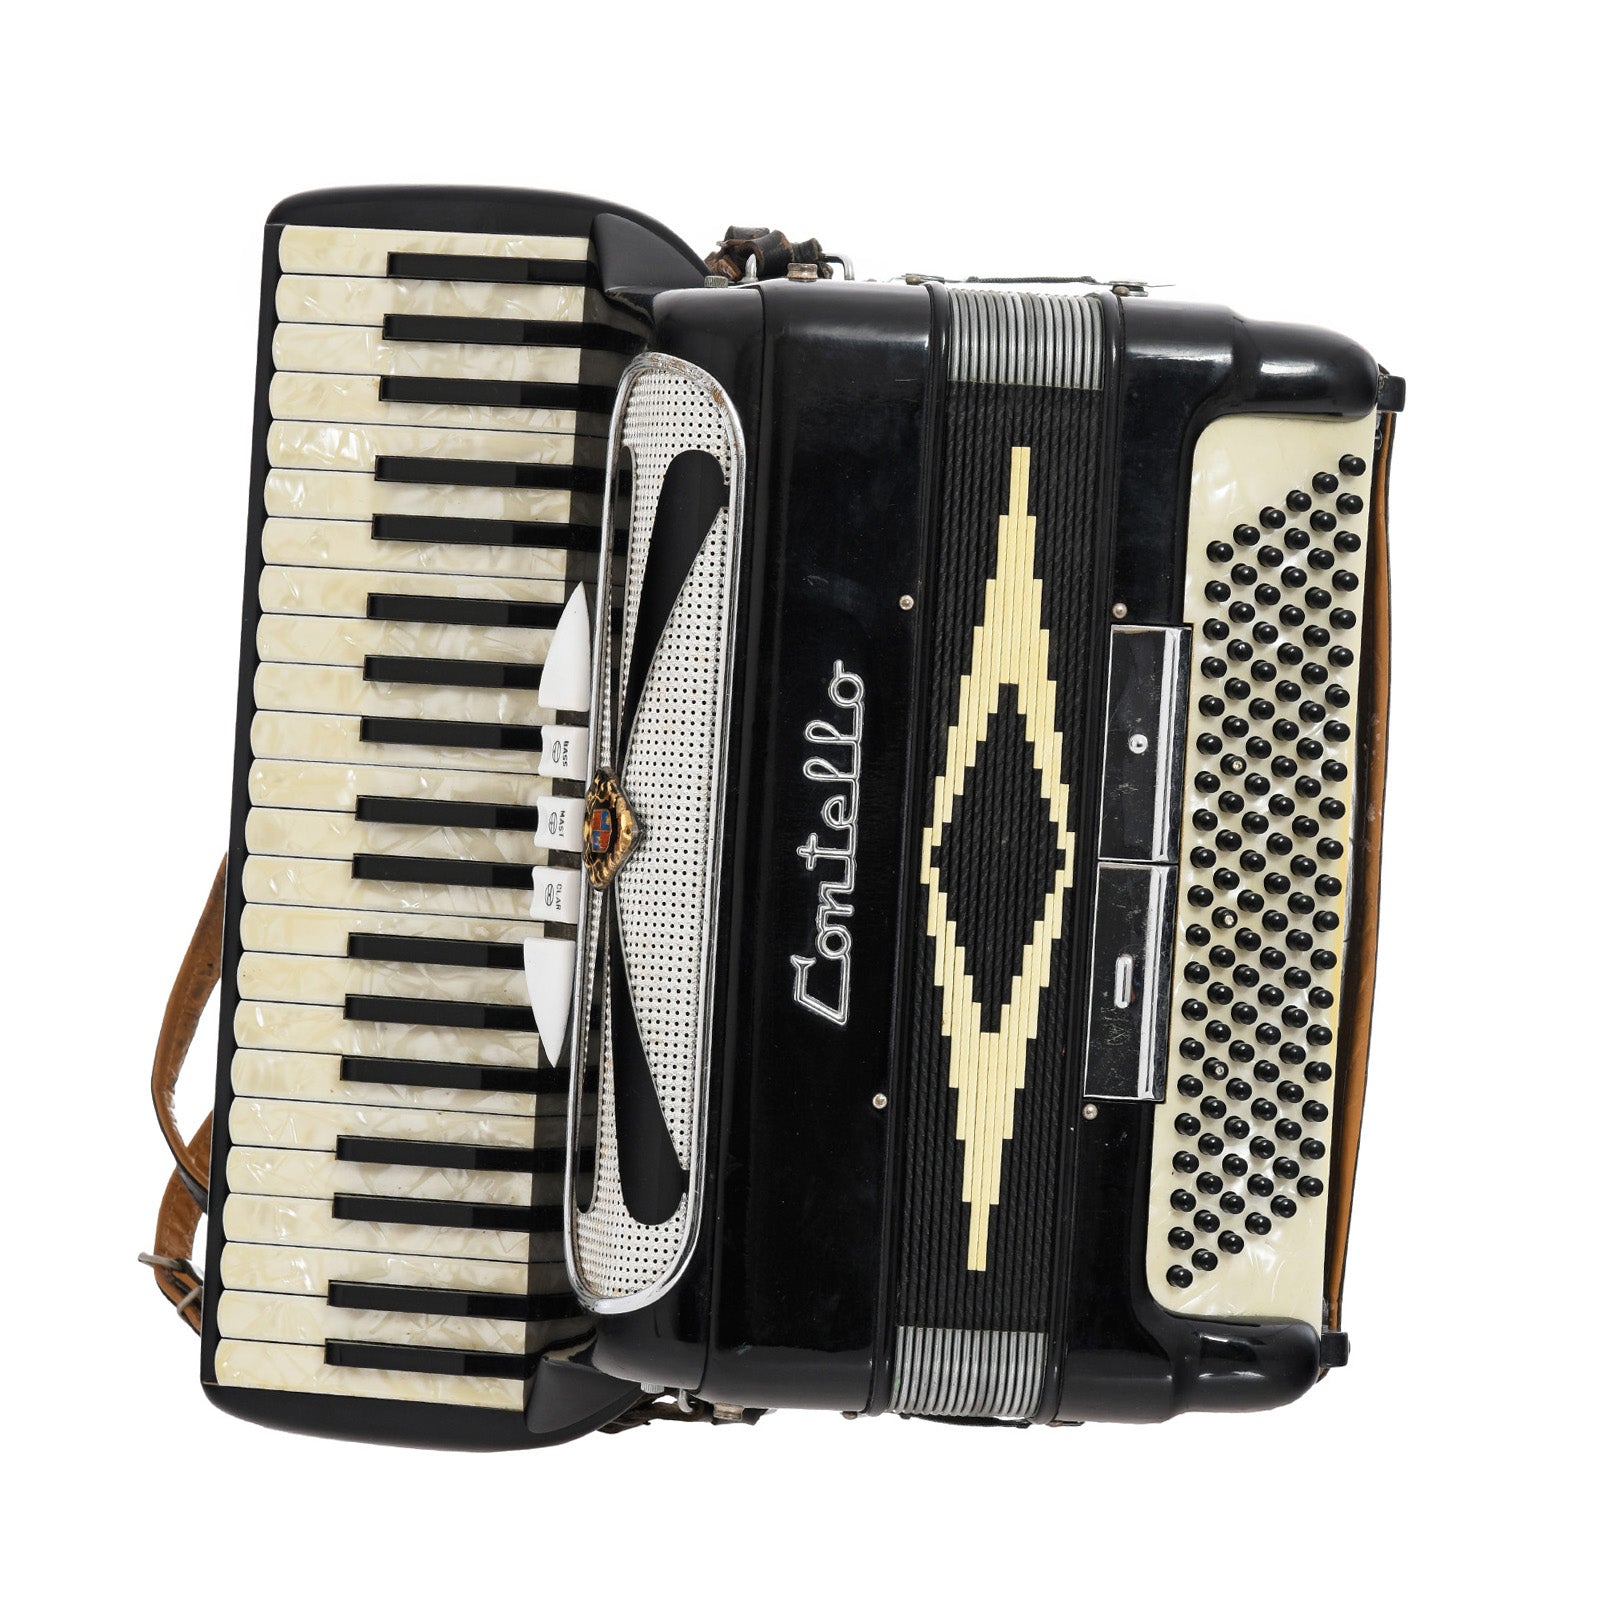 Front of Contello Keyboard Accordion